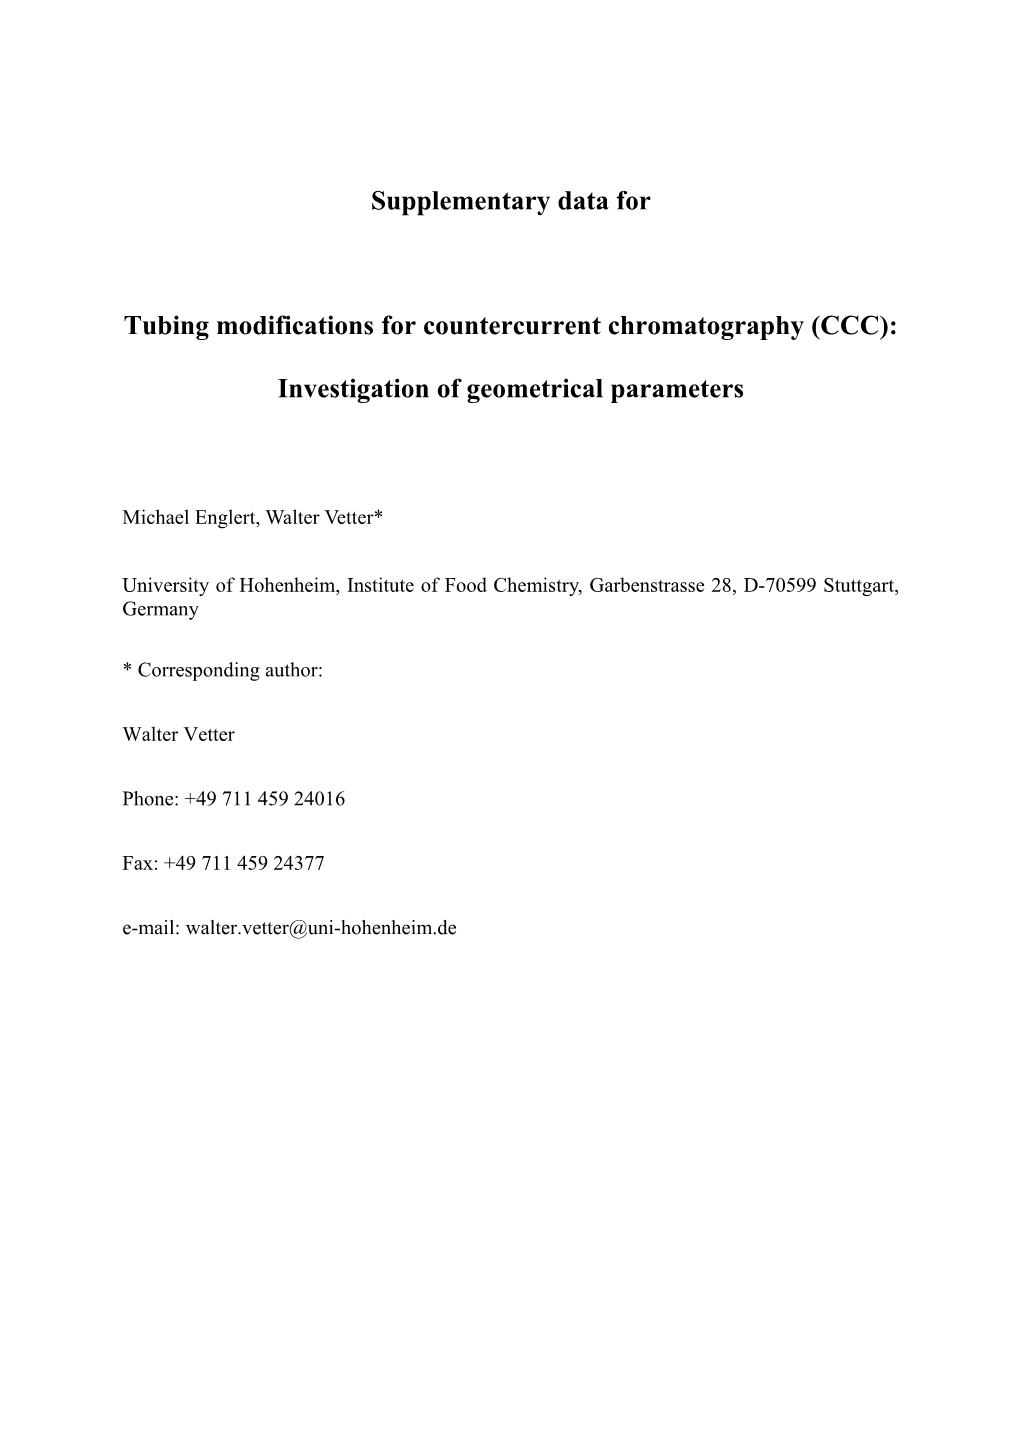 Tubing Modifications for Countercurrent Chromatography (CCC): Investigation of Geometrical